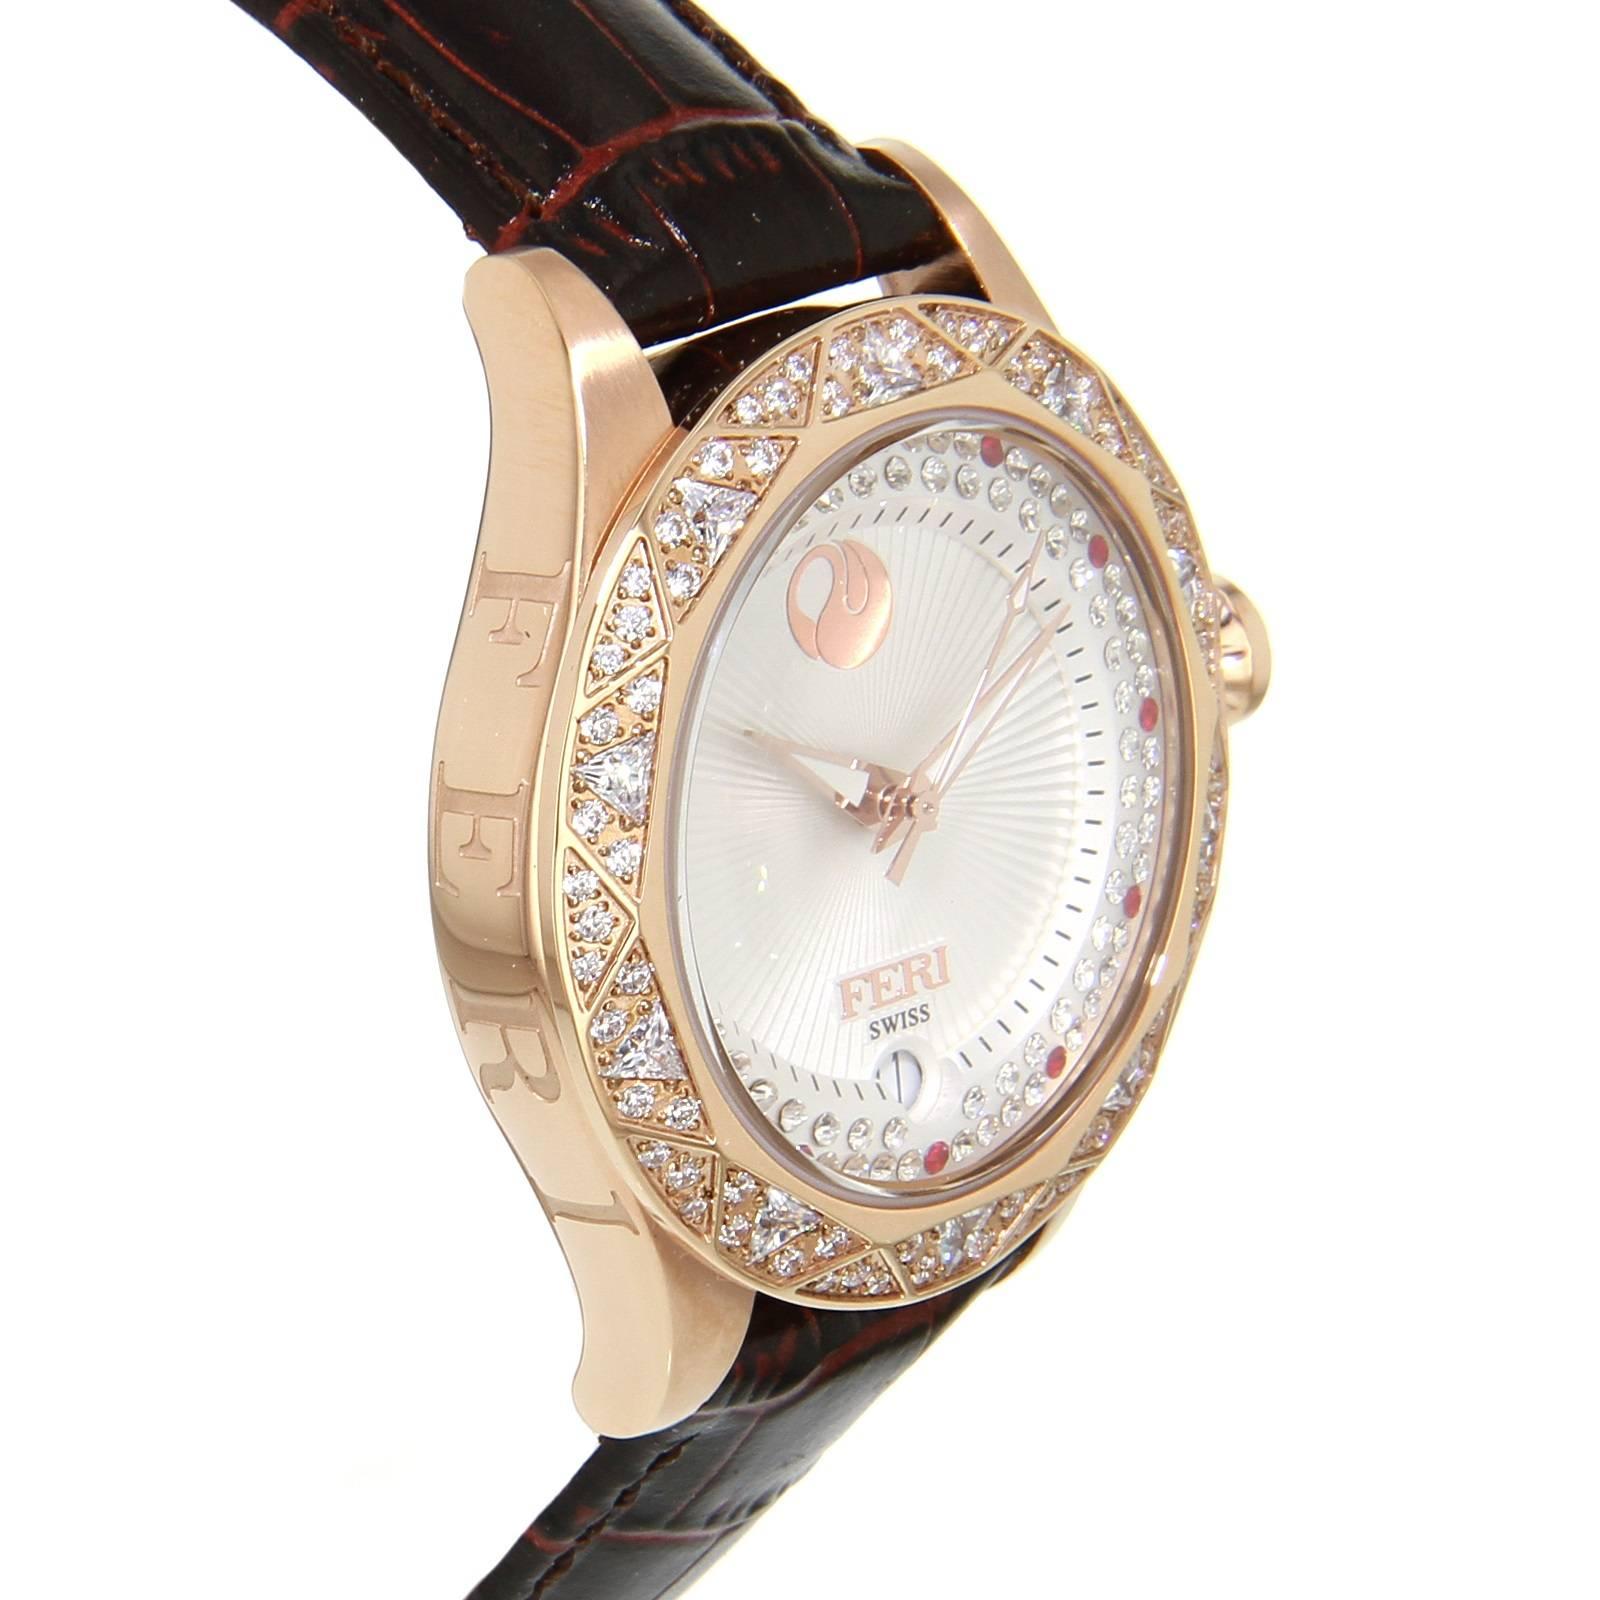 White dial
Swiss made movement
Rose gold toned case
3 piece Solid Stainless Steel Case 
Genuine leather band with metal clasp
10 ATM of water resistance
Date Function
Sapphire crystal glass face 
Set with over 80 beautiful clear and red stones
3